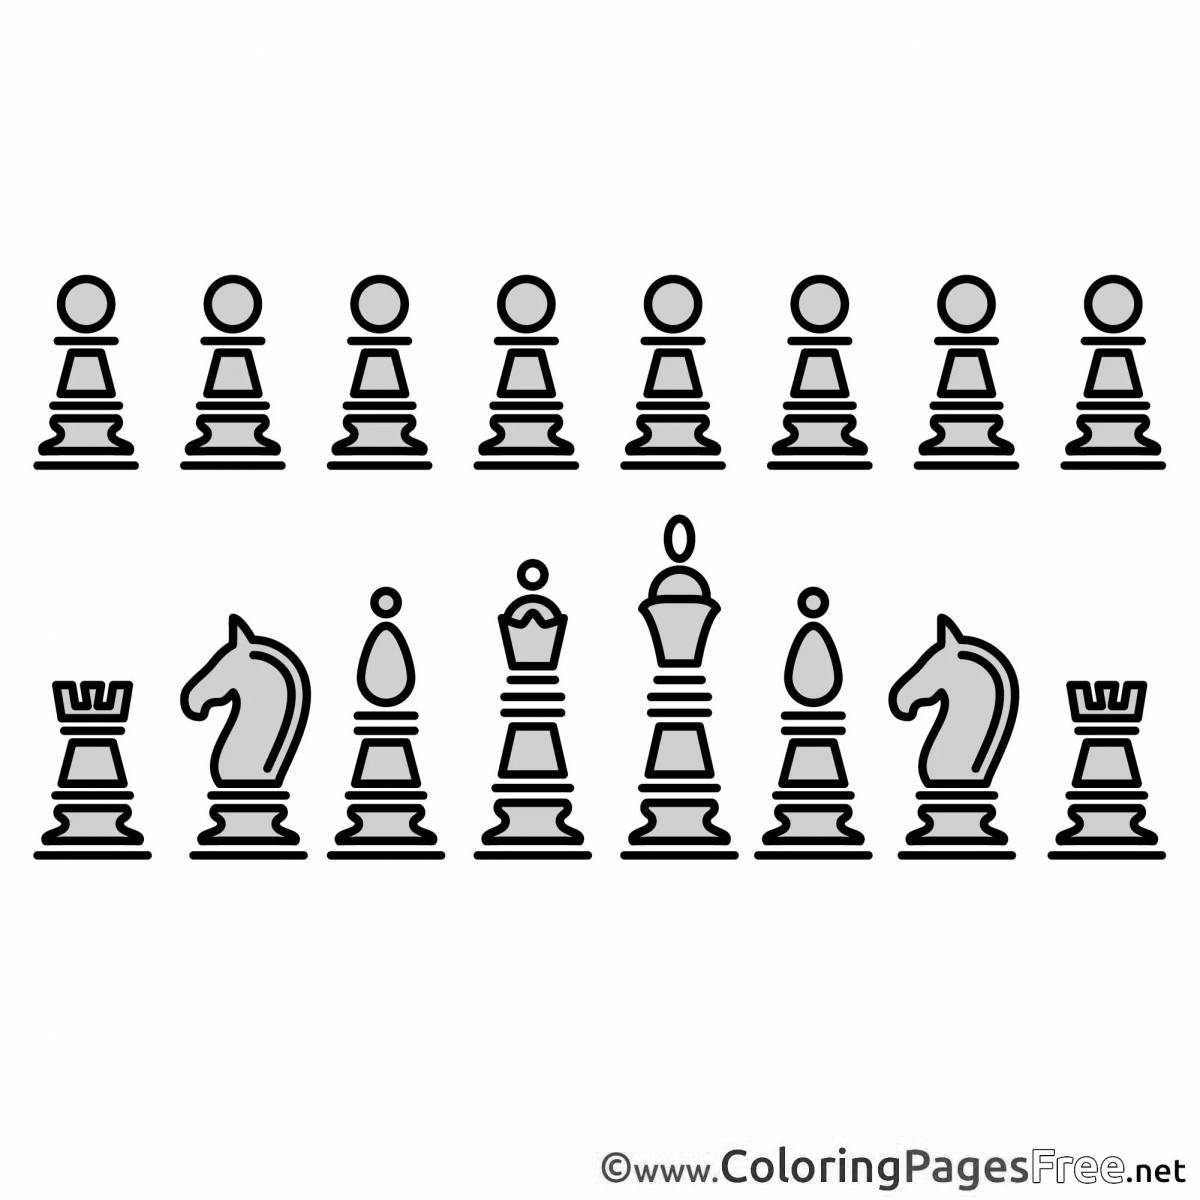 Coloring bright chess pieces